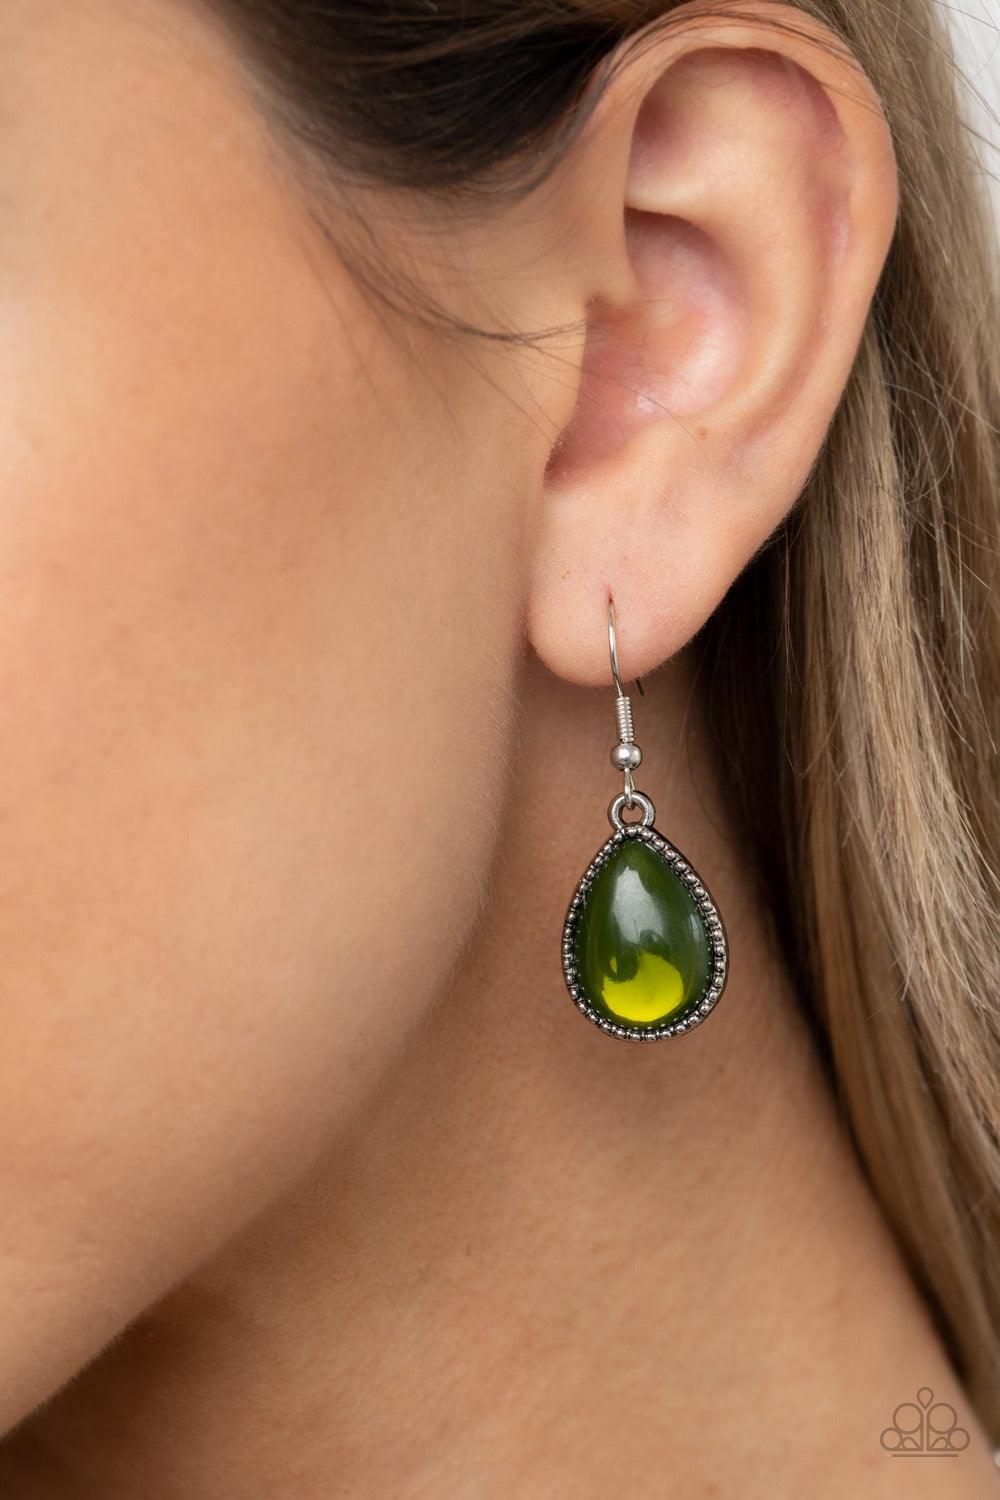 Paparazzi Accessories Opal Auras - Green Featuring an opalescent shimmer, glassy Military Olive teardrop beads are nestled inside shiny silver frames filled with vine-like antiqued filigree. Graduating in size, the whimsical frames delicately link below t